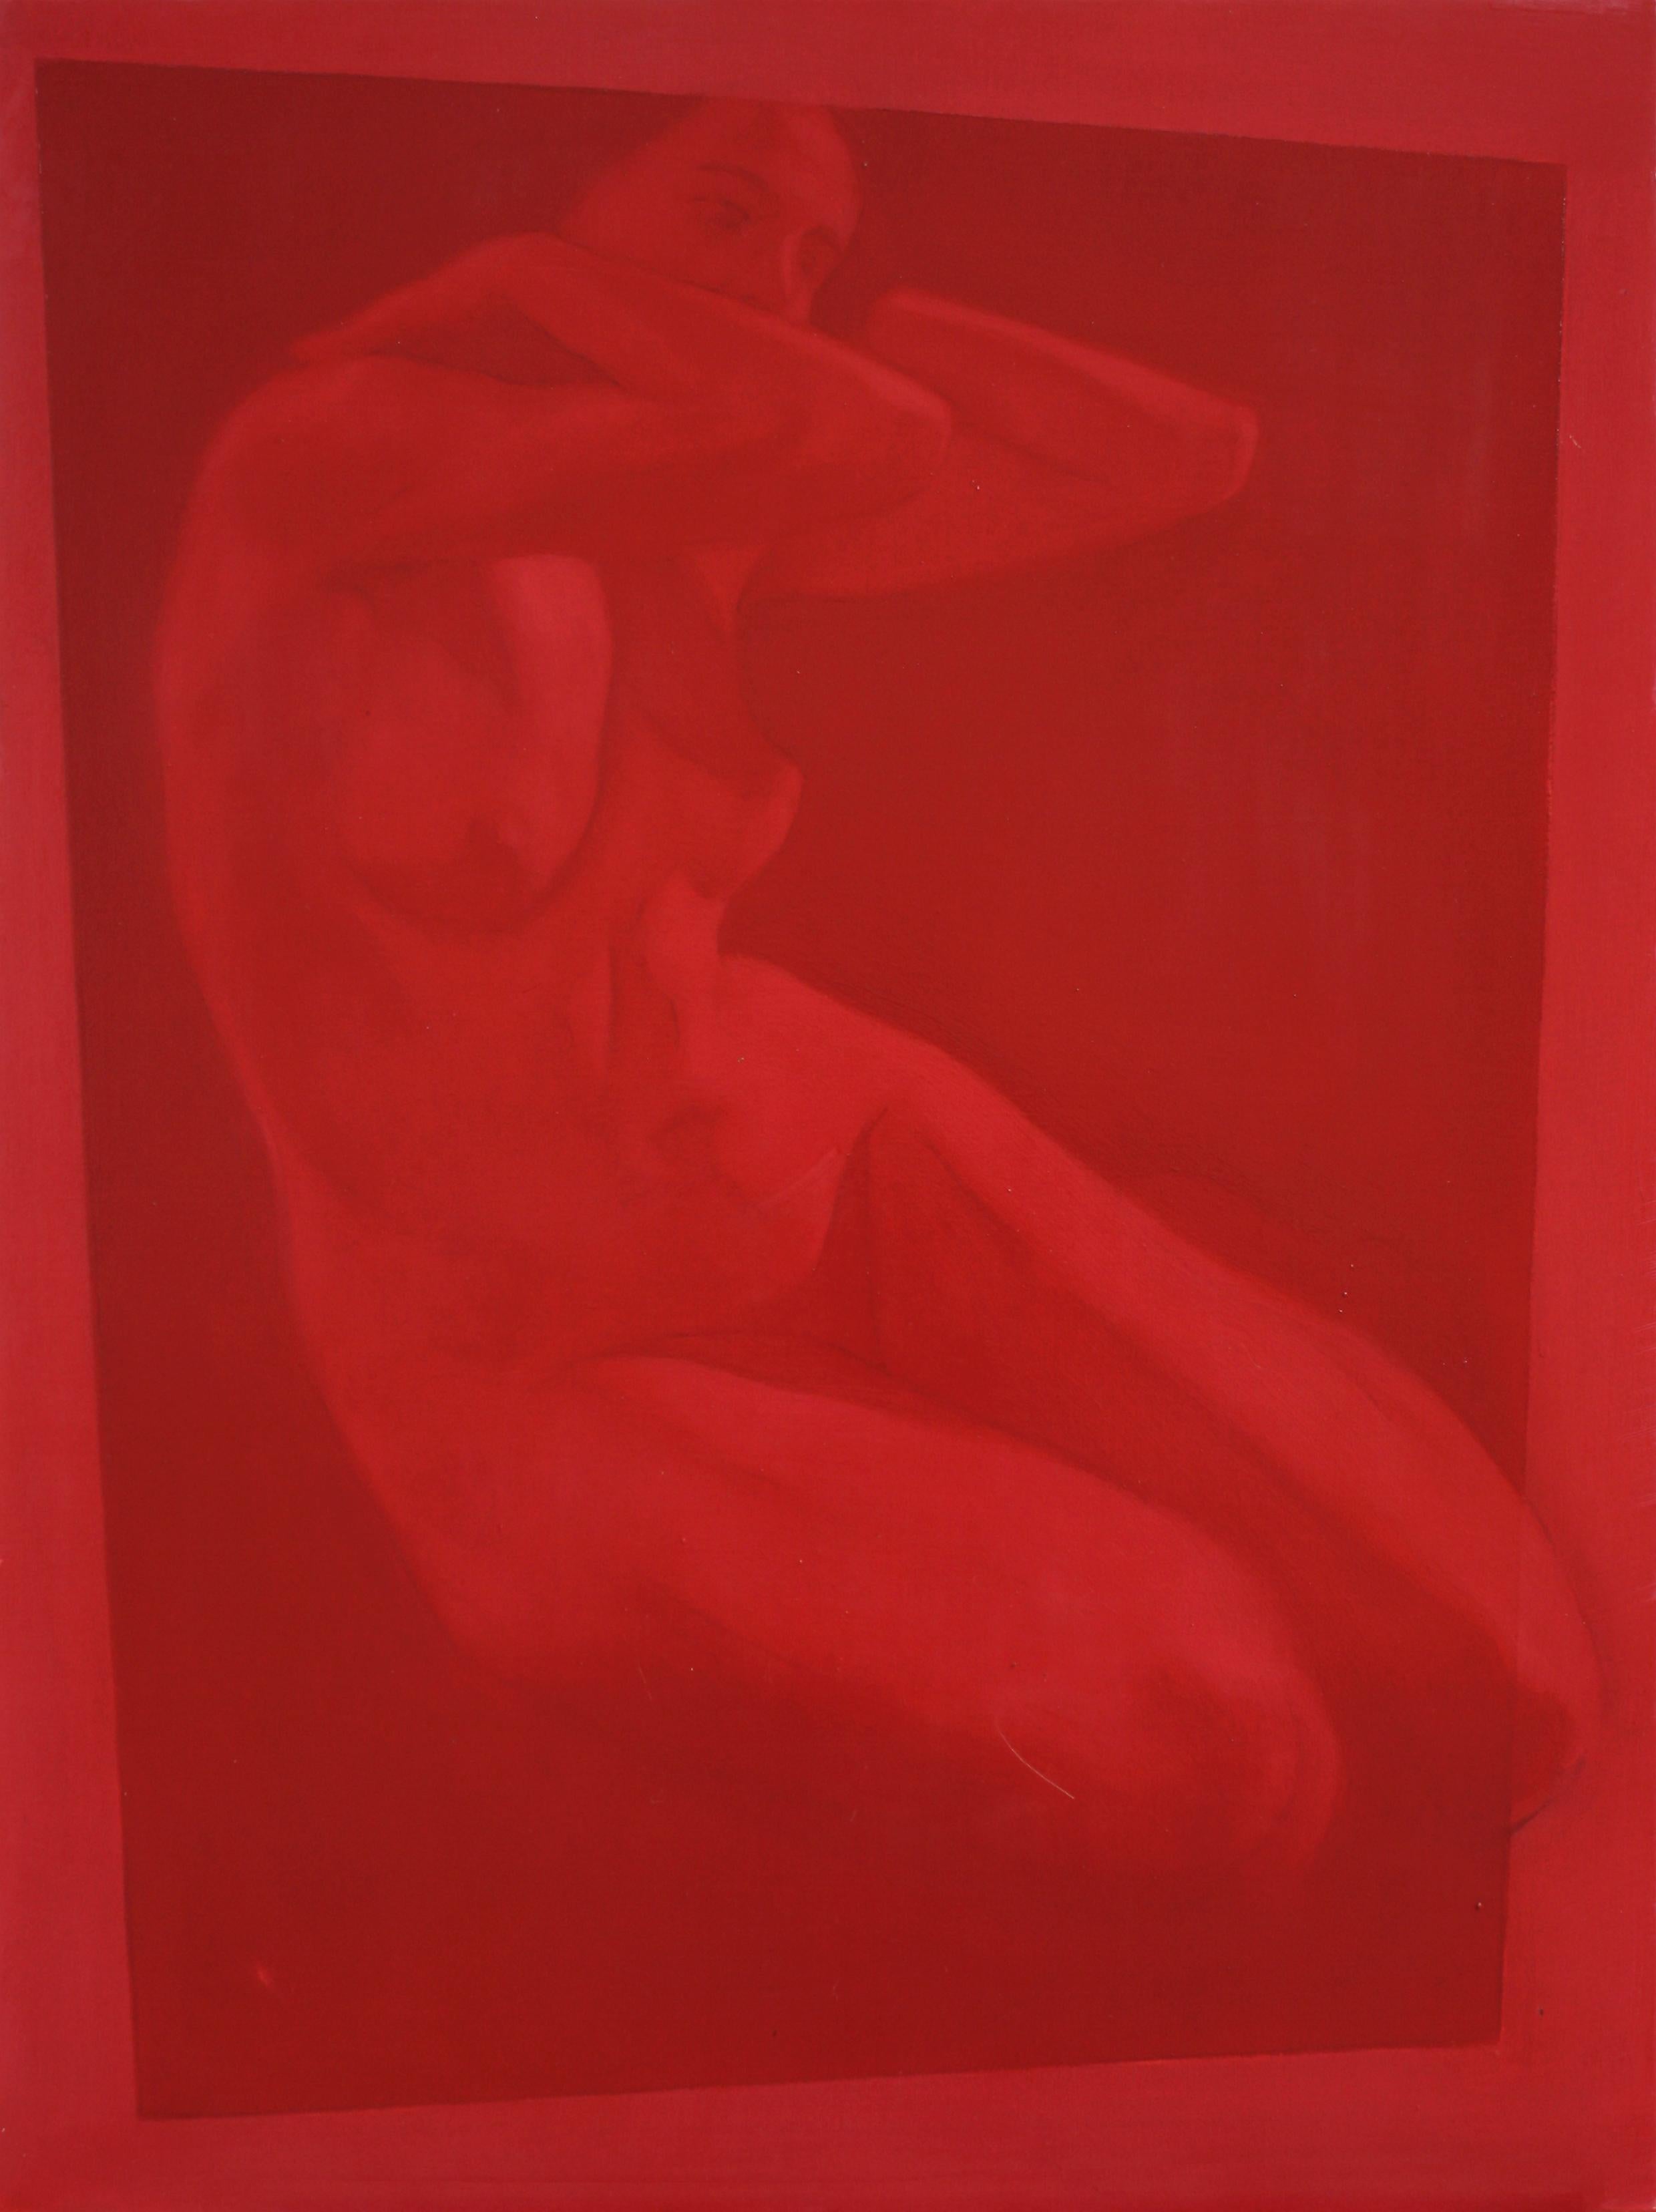 Simone Geraci Portrait - Elegant woman nude portrait in red oil on canvas by contemporary Italian painter